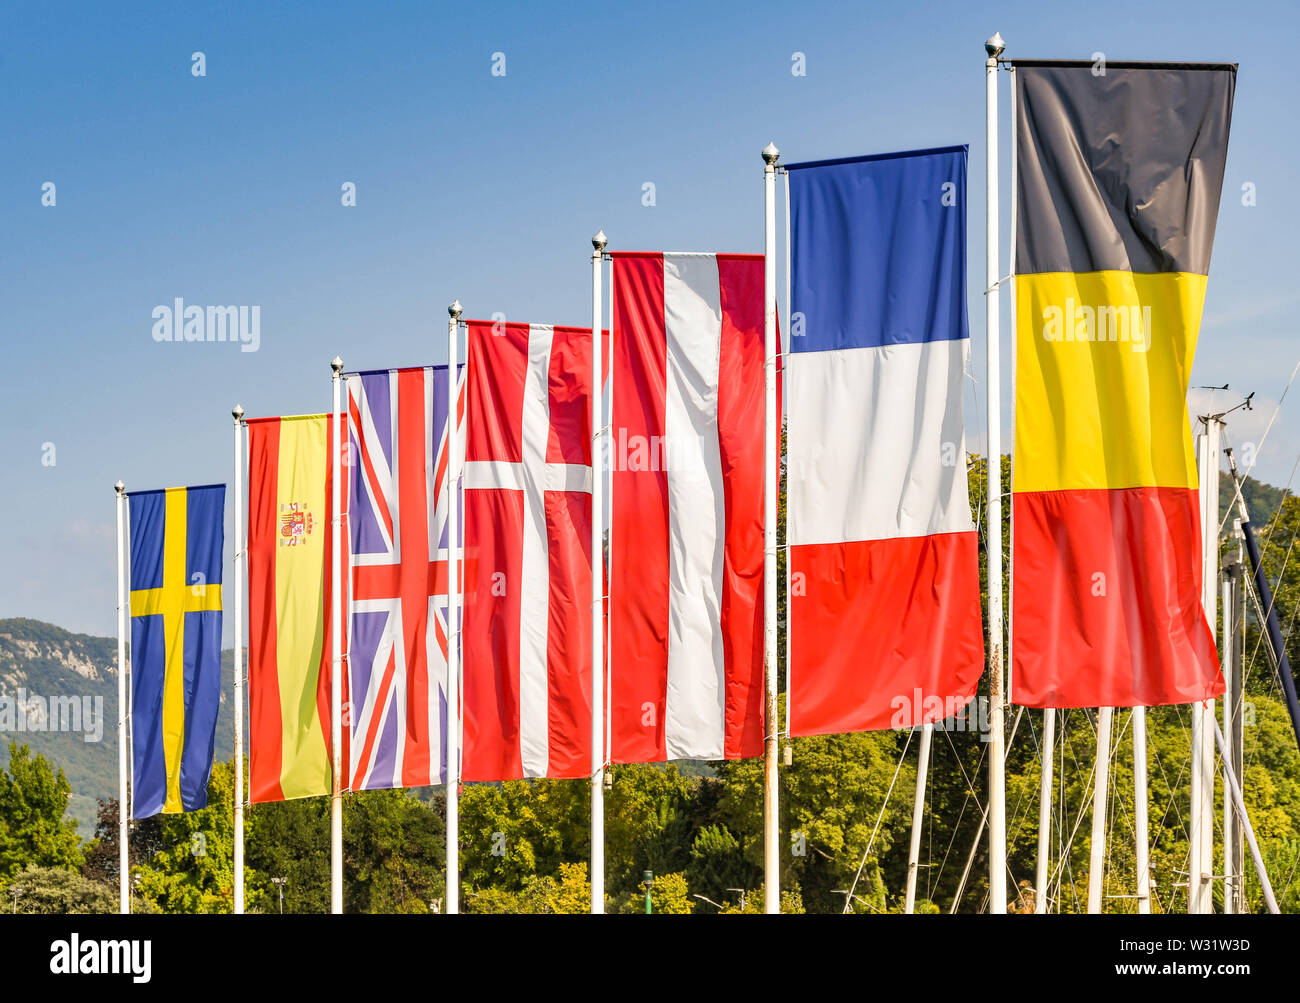 Flags of some of the Member States of the European Union, including the United Kingdom, against a blue sky Stock Photo